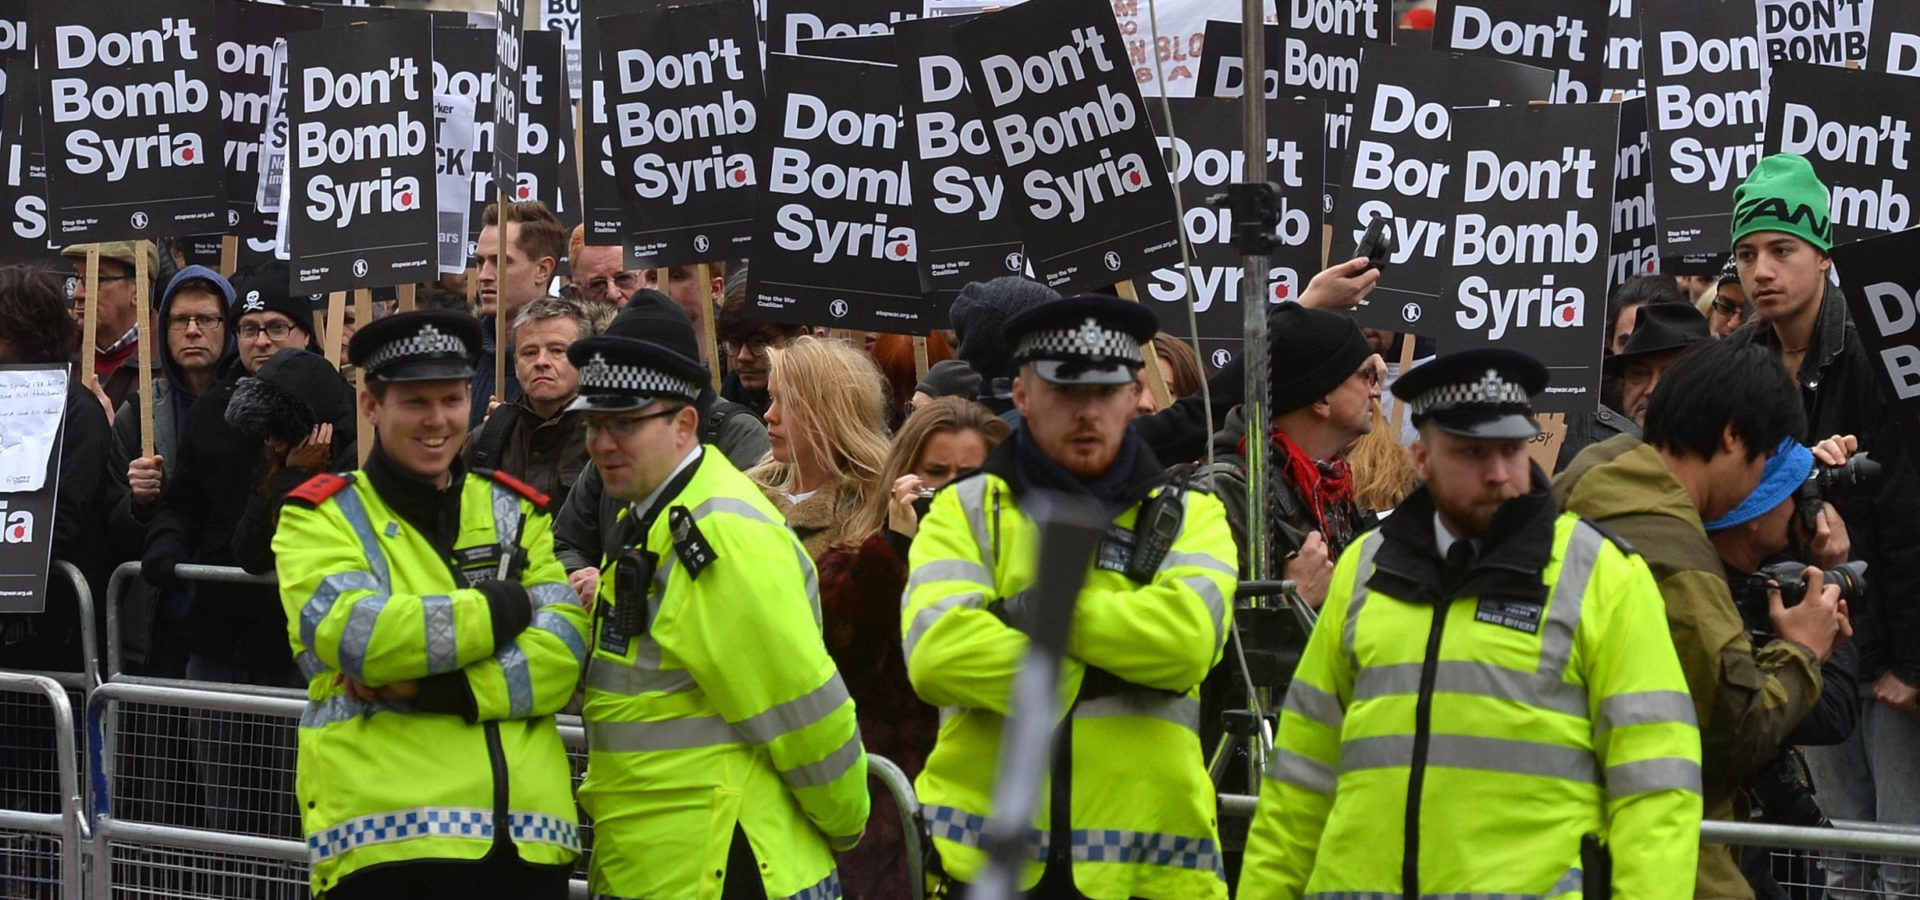 Demonstrators protest against British bombing of Syria outside Downing Street in London, Britain, 28 November 2015. (Hannah McKay/PA)